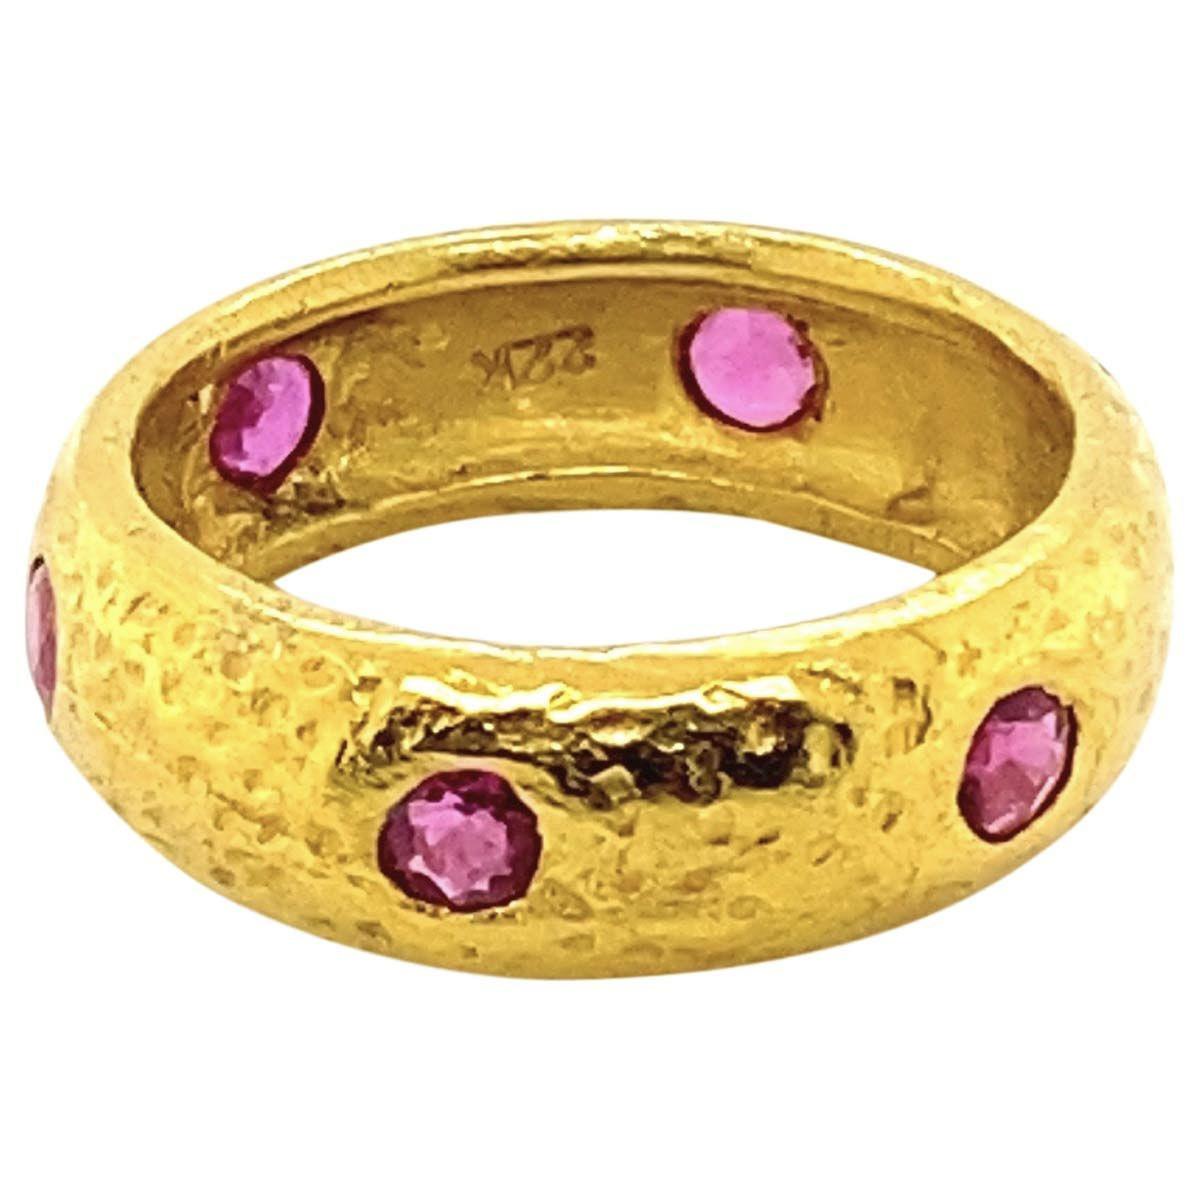 A fabulous set of 22 karat gold rings, hammer set with sapphires & rubies. These rings are stylish and heavy, look so good together or separately. There is a lot of versatility as you can mix and match them with other jewels in your collection, the